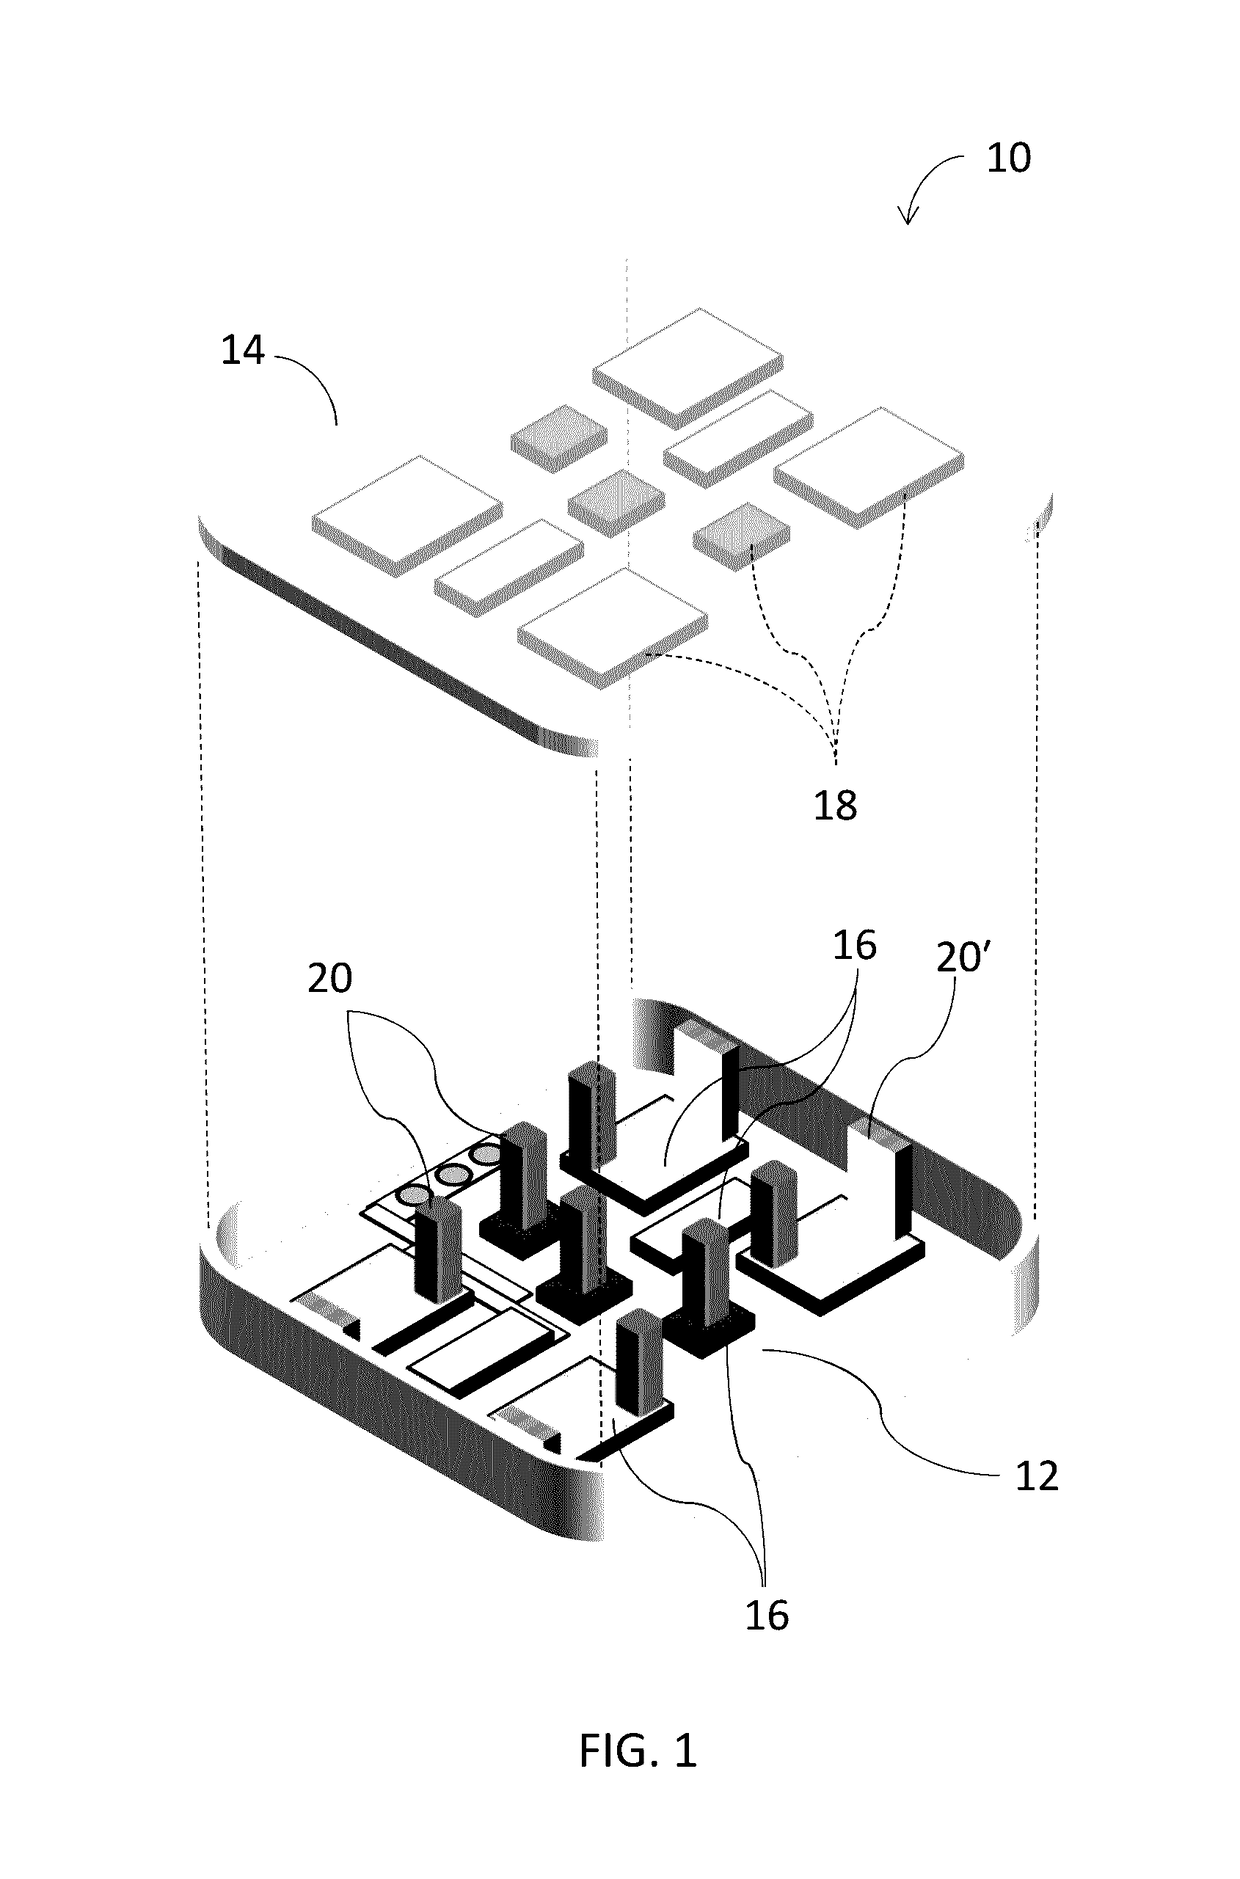 Electronic module with free-formed self-supported vertical interconnects